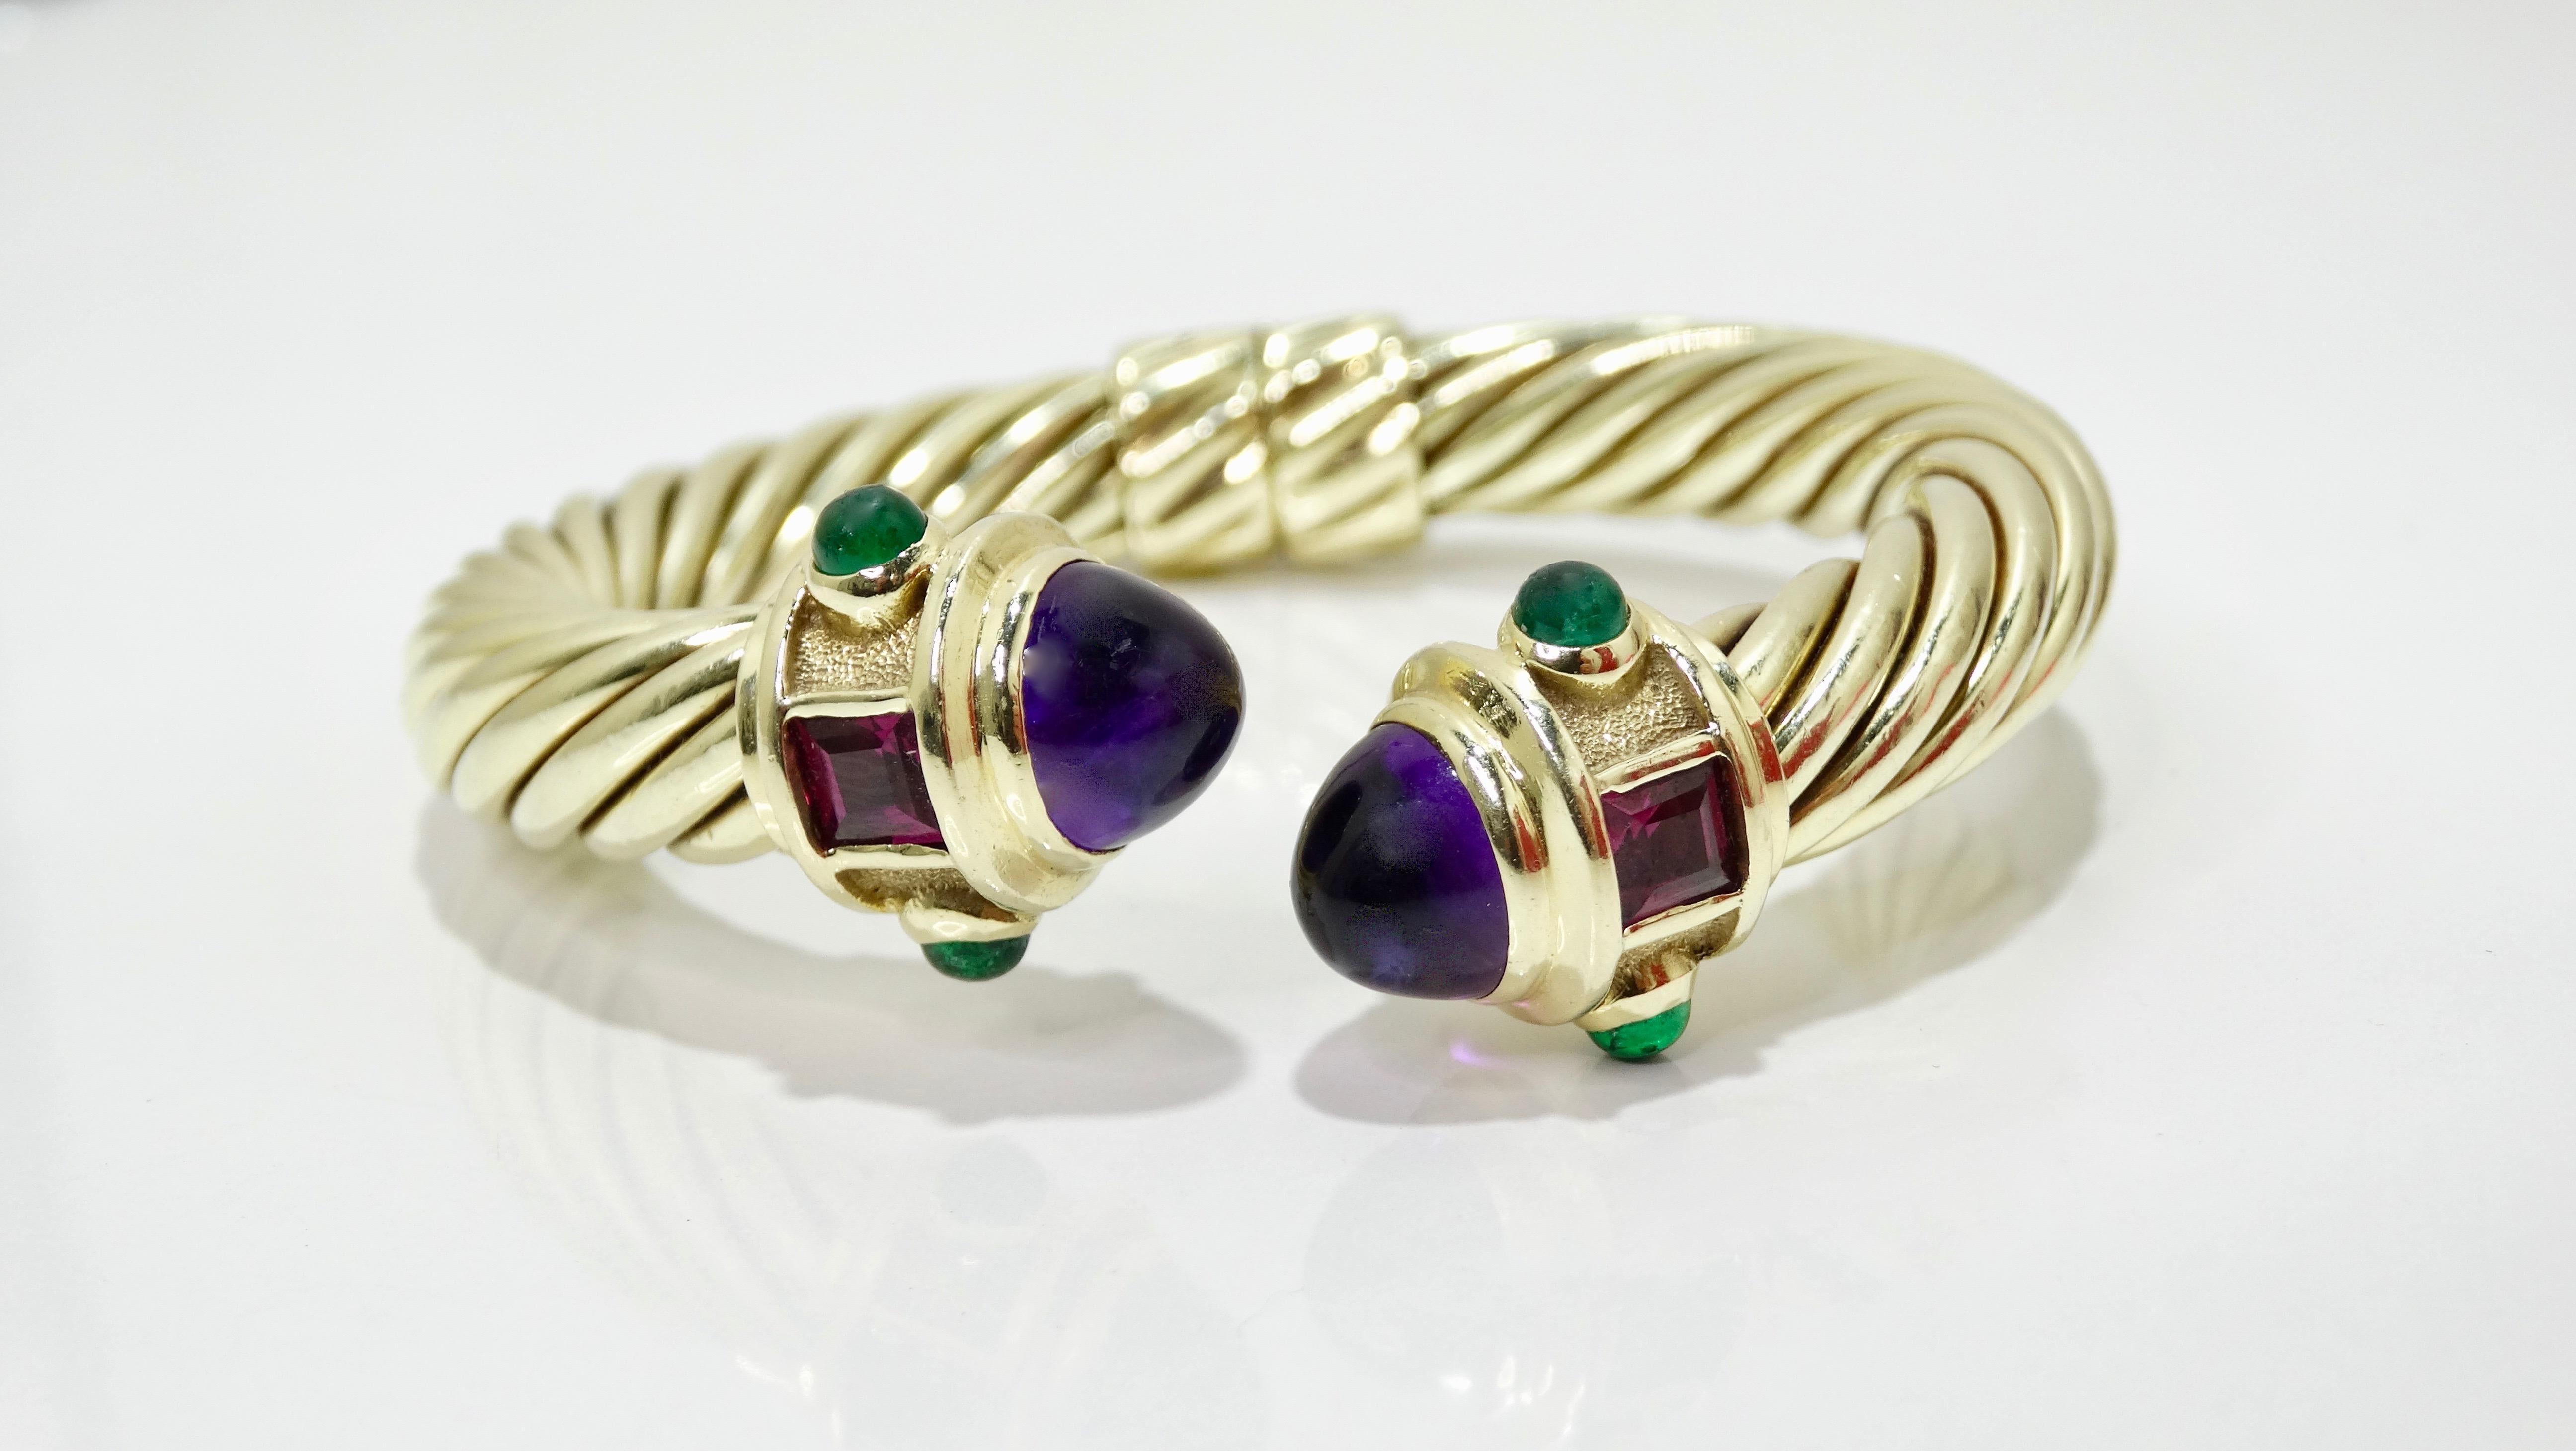 Say hello to your new favorite bracelet! Circa 1980s from David Yurman's Renaissance collection, this bracelet is crafted from 14k gold and sterling silver and features a twisted cable design with two large Cabochon Amethysts, two Tourmaline stones